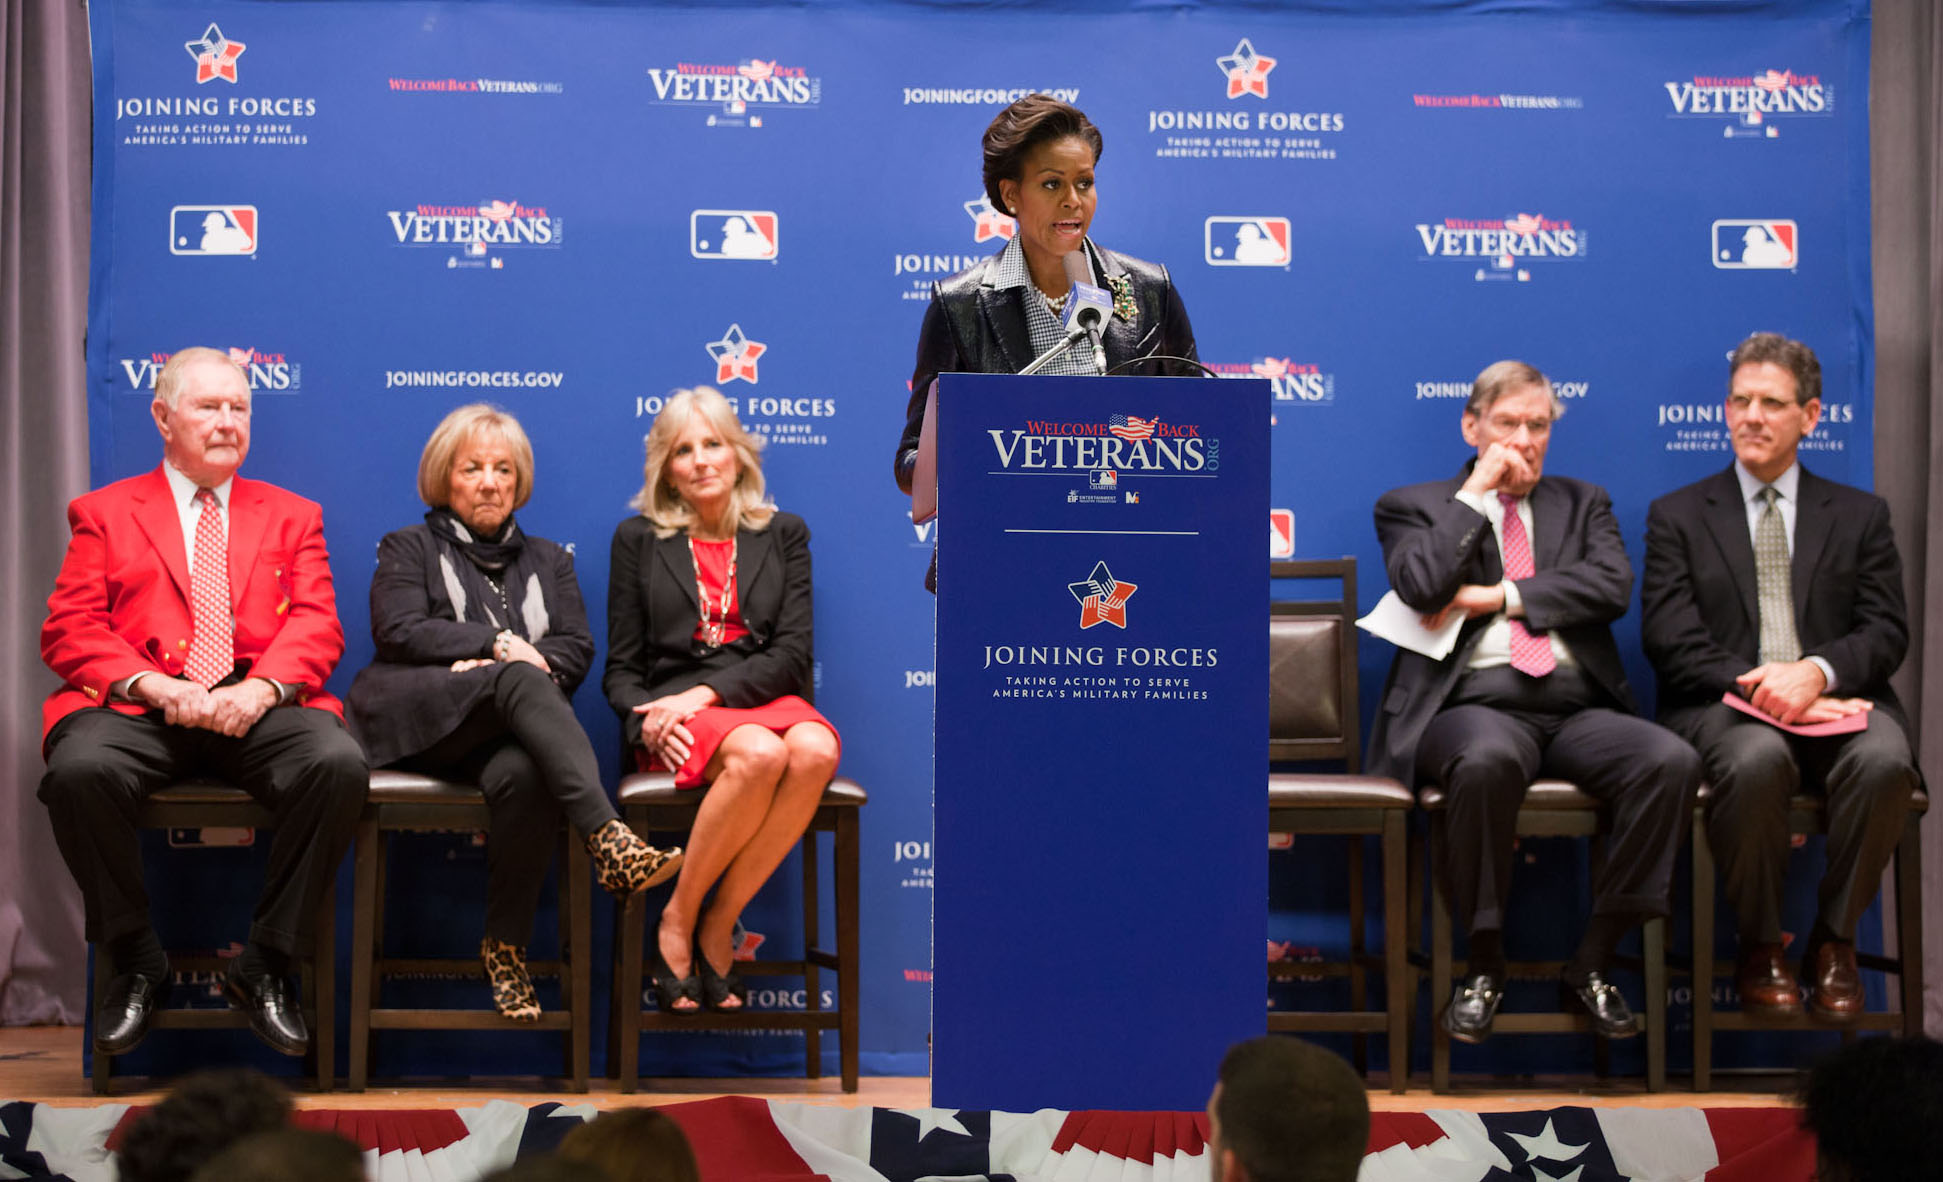 First Lady Michelle Obama and Dr. Jill Biden join representatives from Major League Baseball